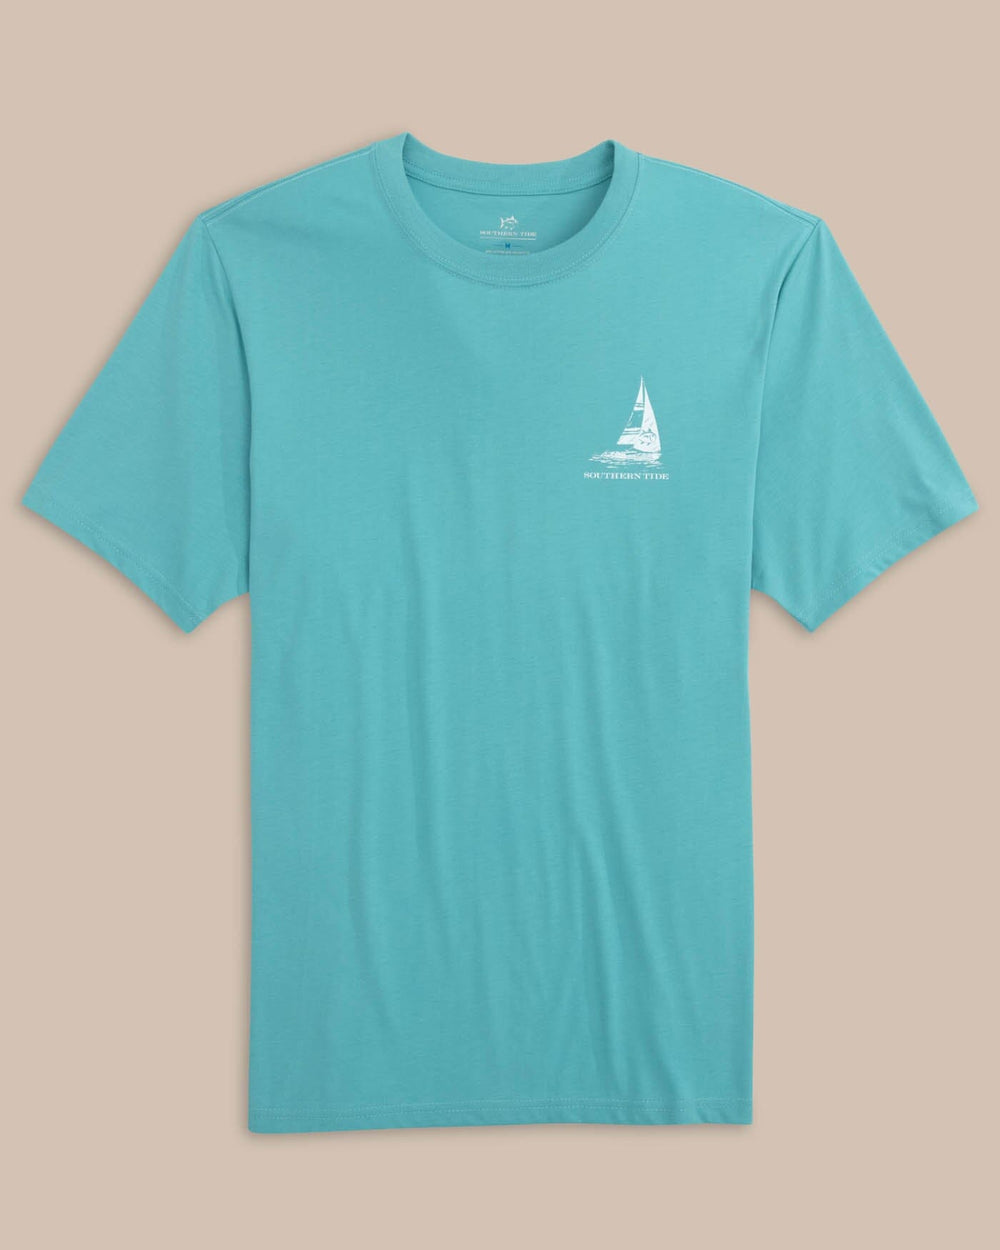 The front view of the Southern Tide Set Sail Tri Short Sleeve T-shirt by Southern Tide - Ocean Aqua